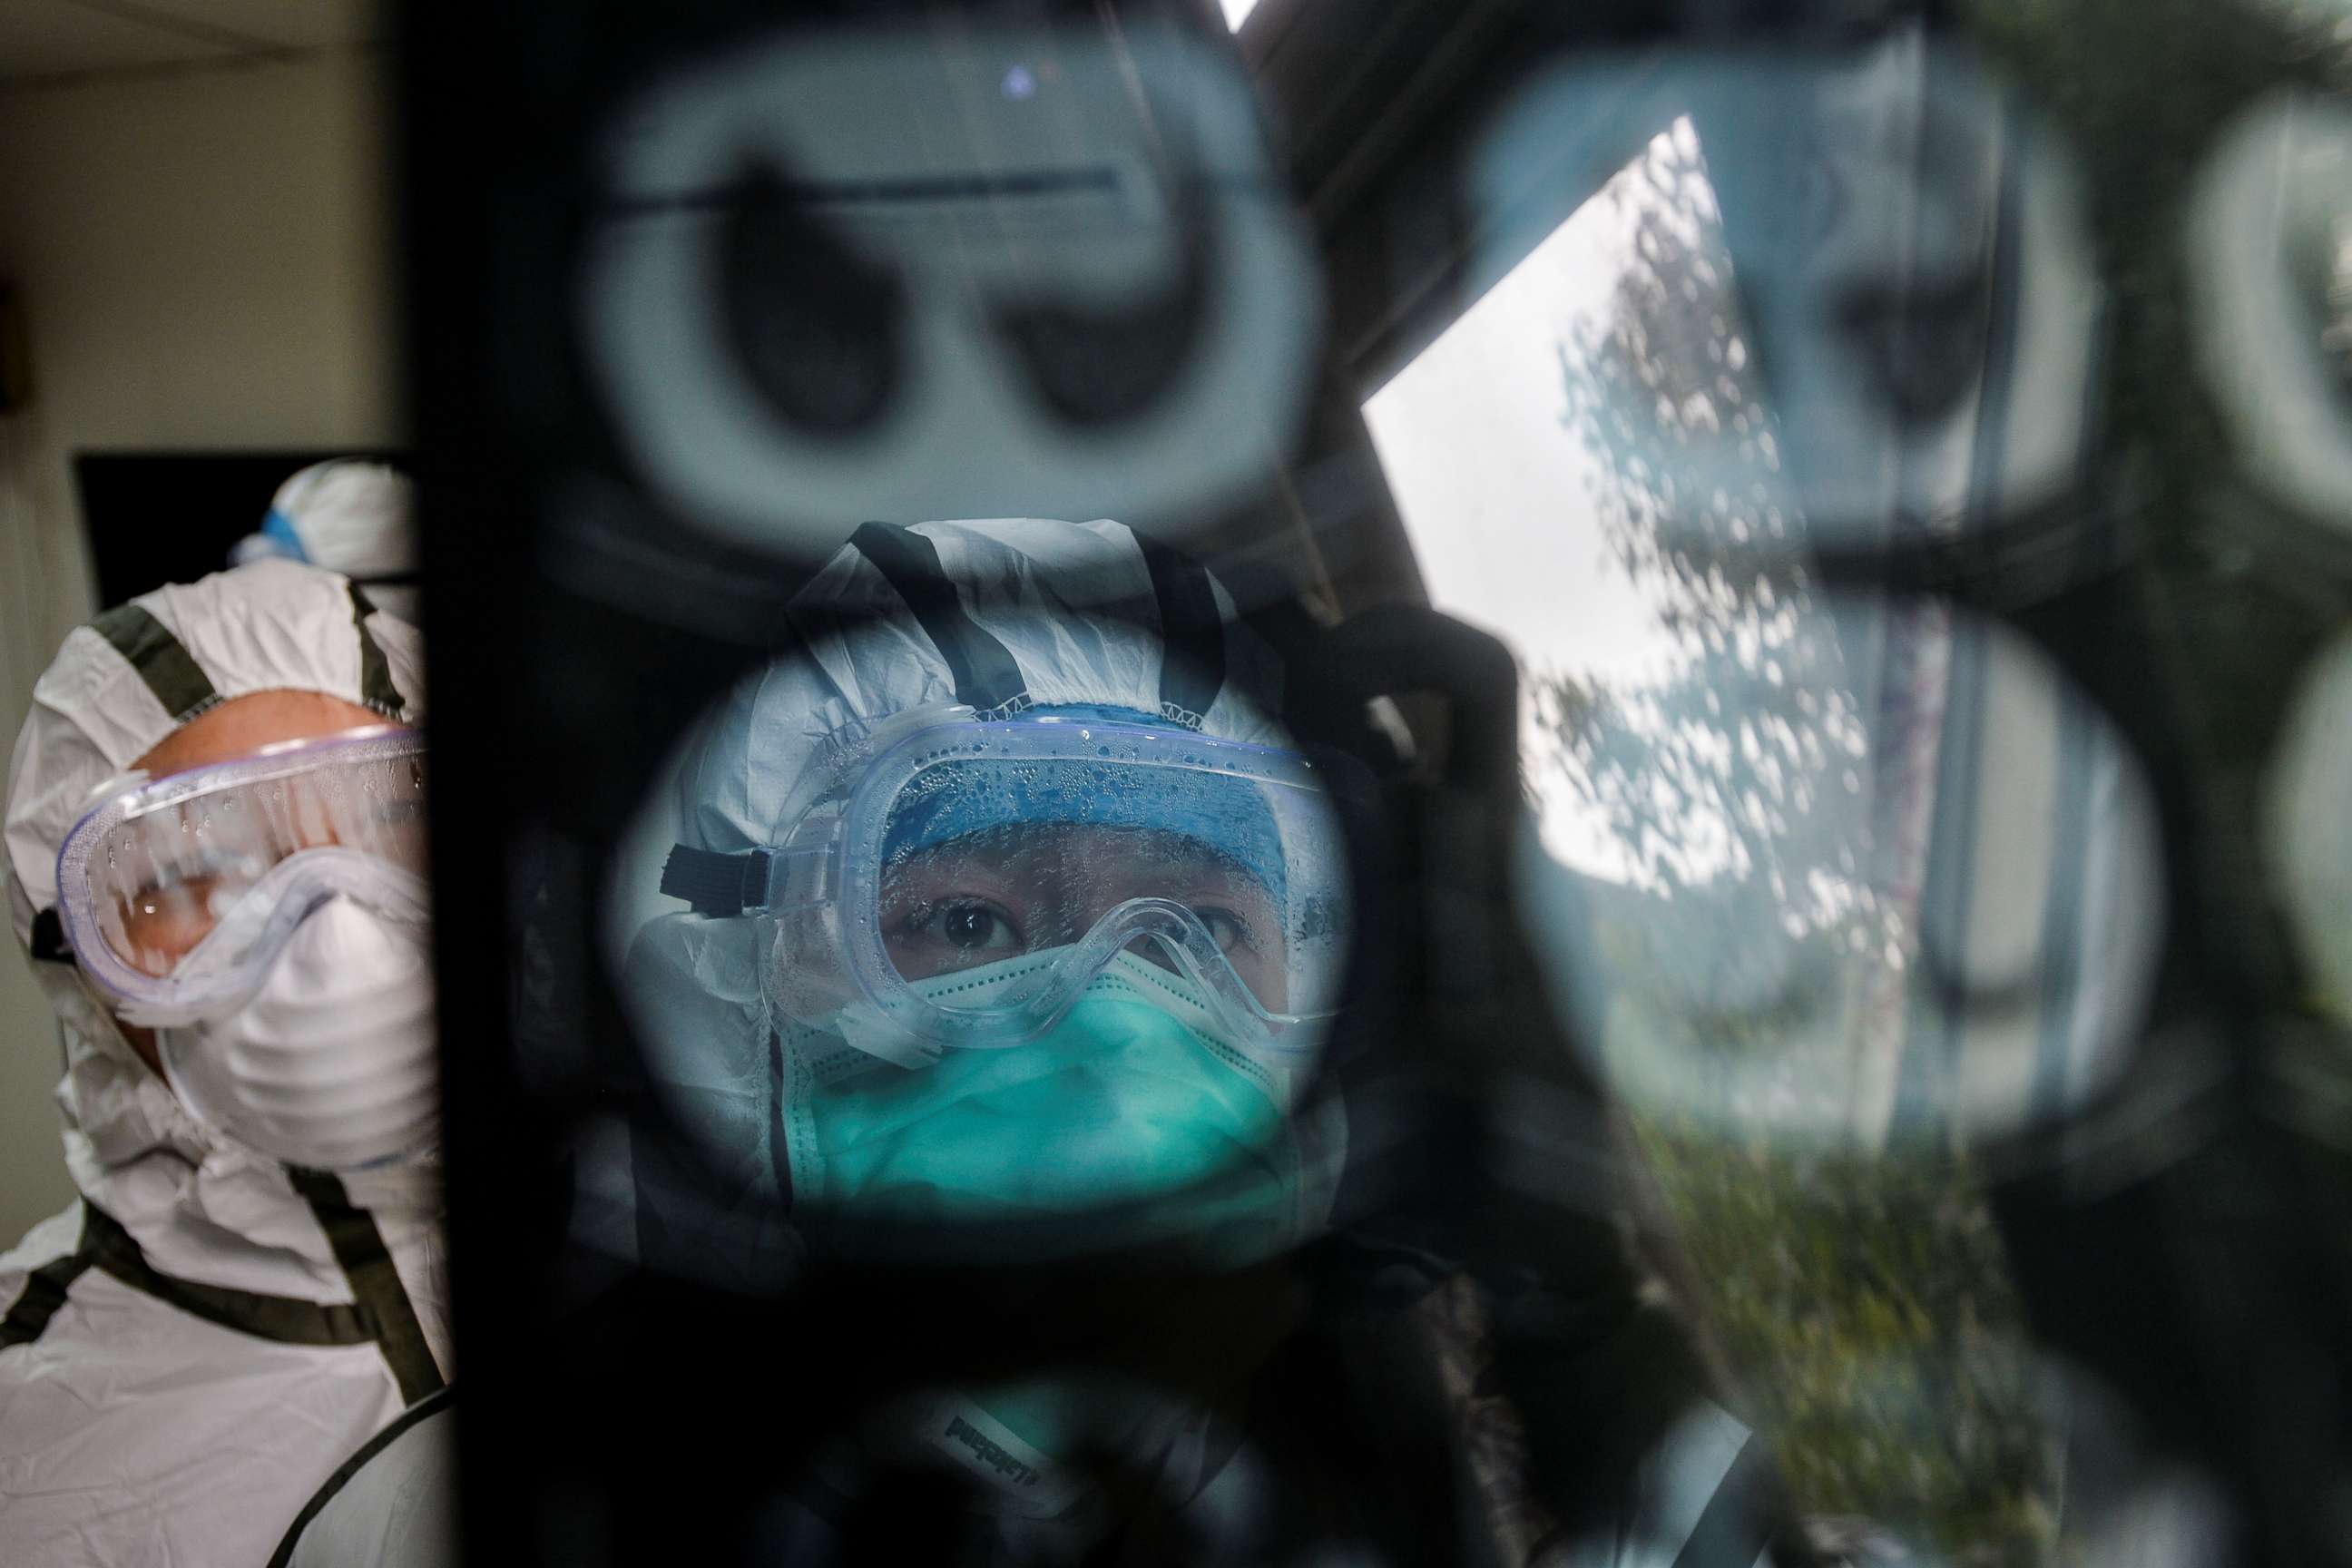 PHOTO: Medical workers in protective suits check a CT (computed tomography) scan image of a patient at a community health service center in the Qingshan district of Wuhan, Hubei province, China, Feb. 8, 2020.